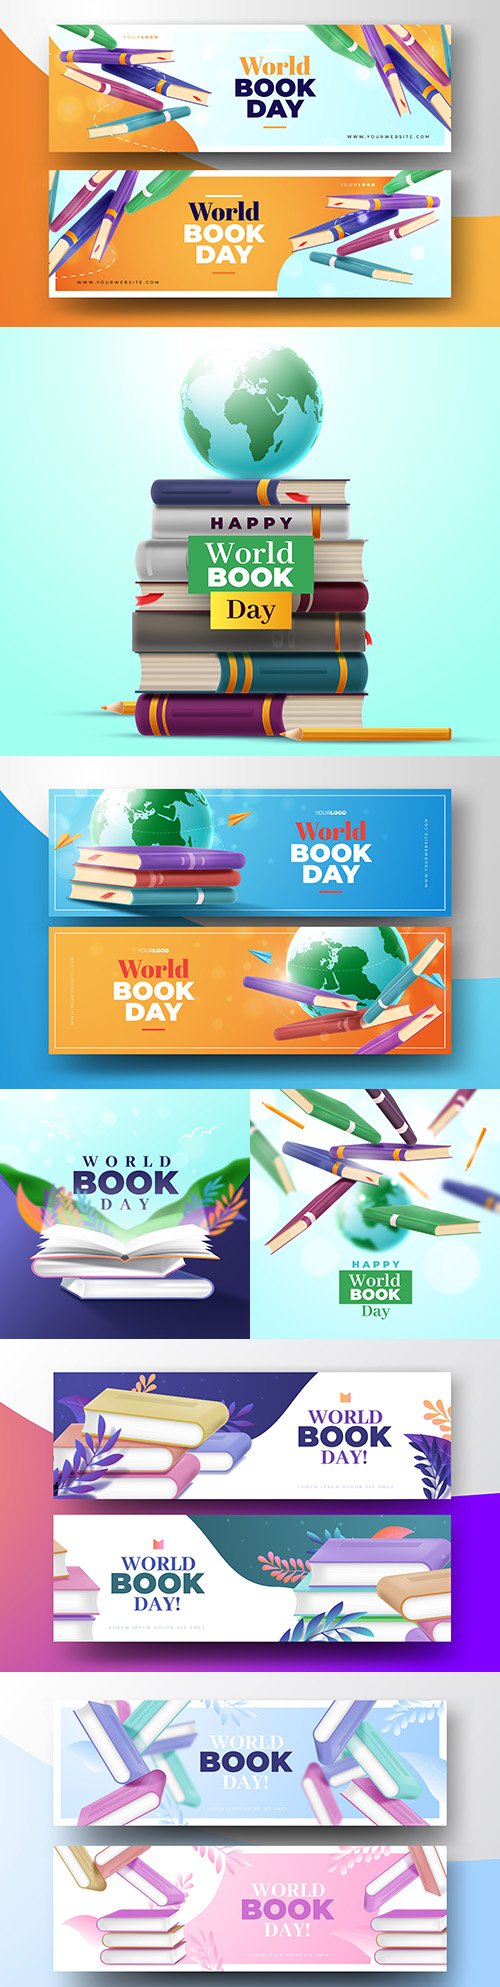 World book day design banner realistic illustrations